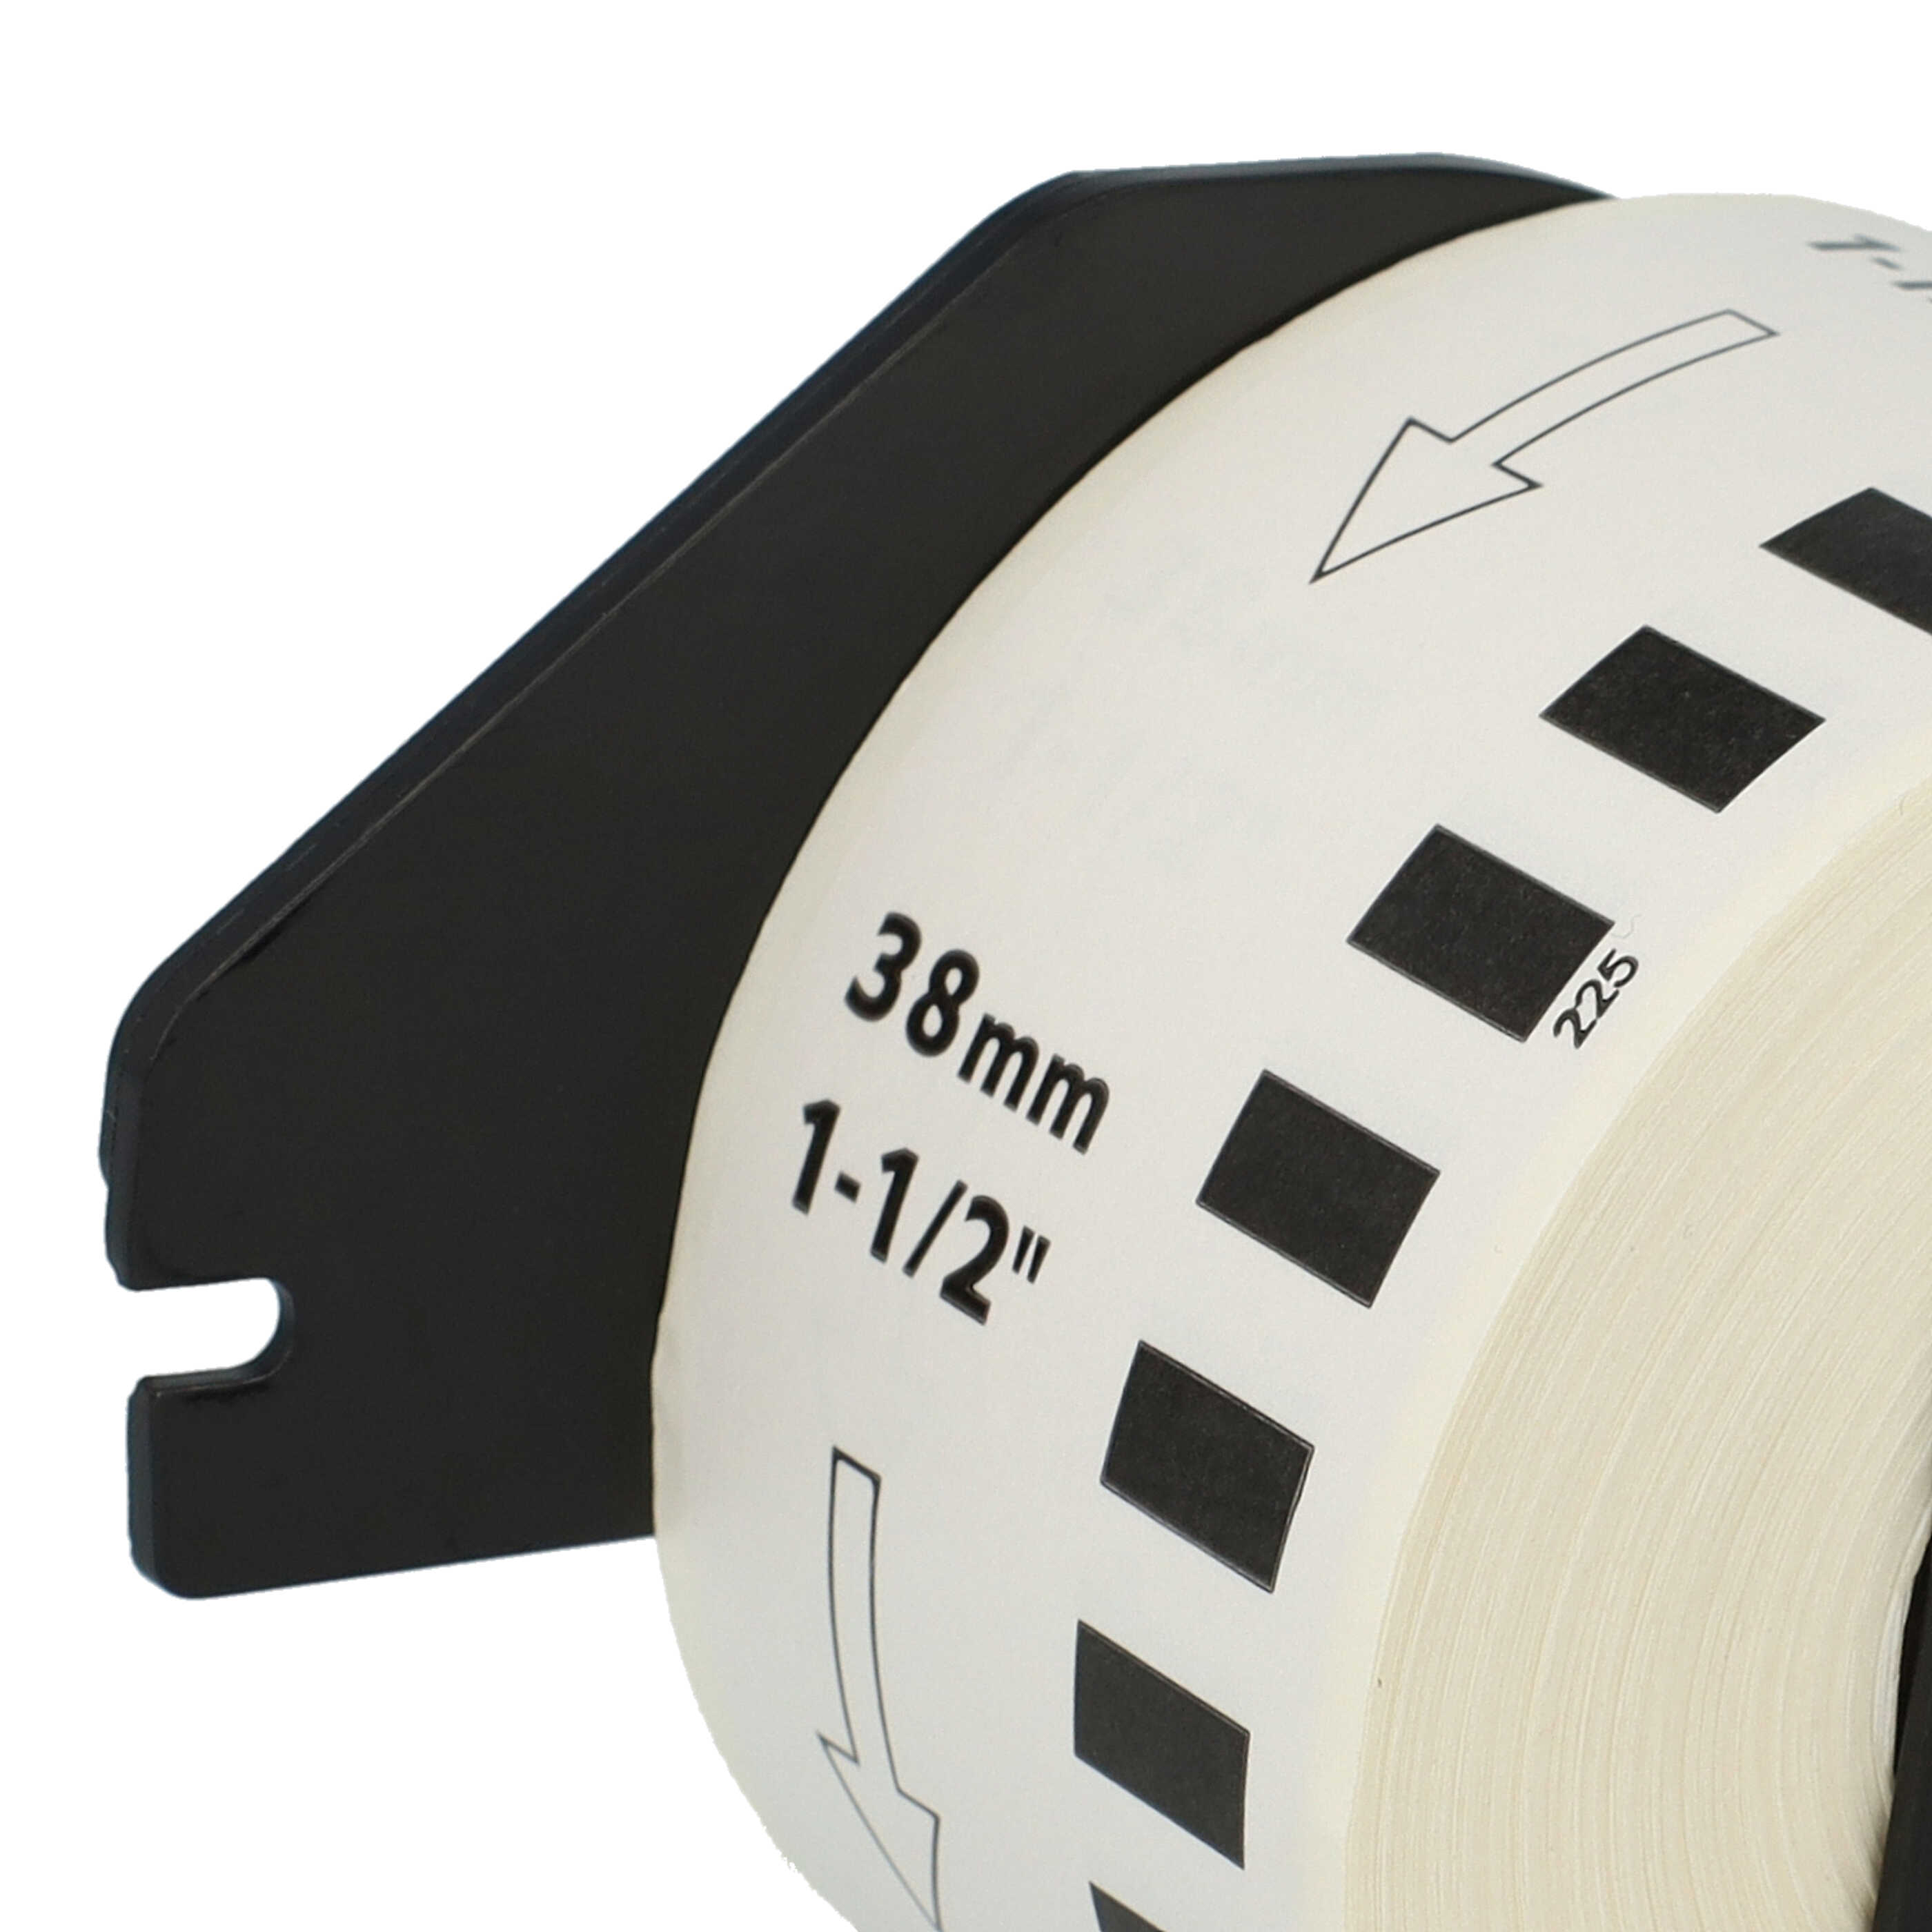 Labels replaces Brother DK-22225 for Labeller - 38 mm x 30.48m + Holder